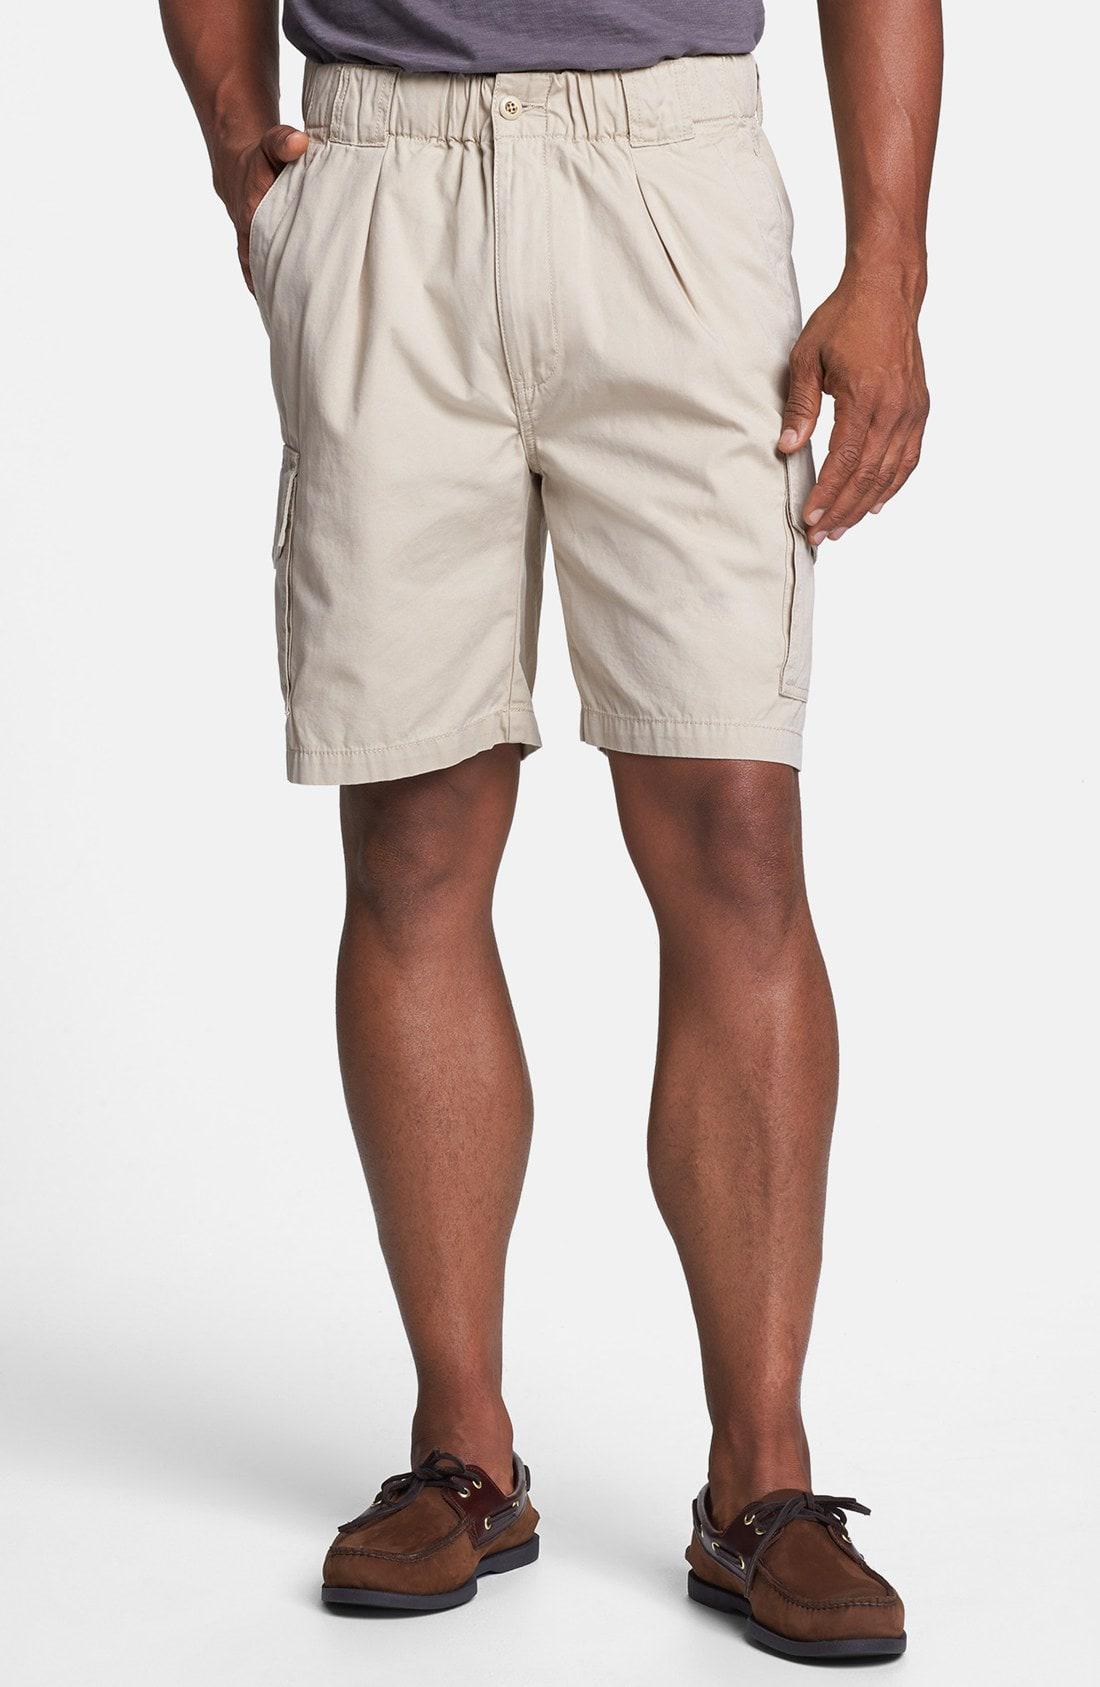 Lyst - Tommy Bahama Relax 'survivor' Cargo Shorts in Natural for Men